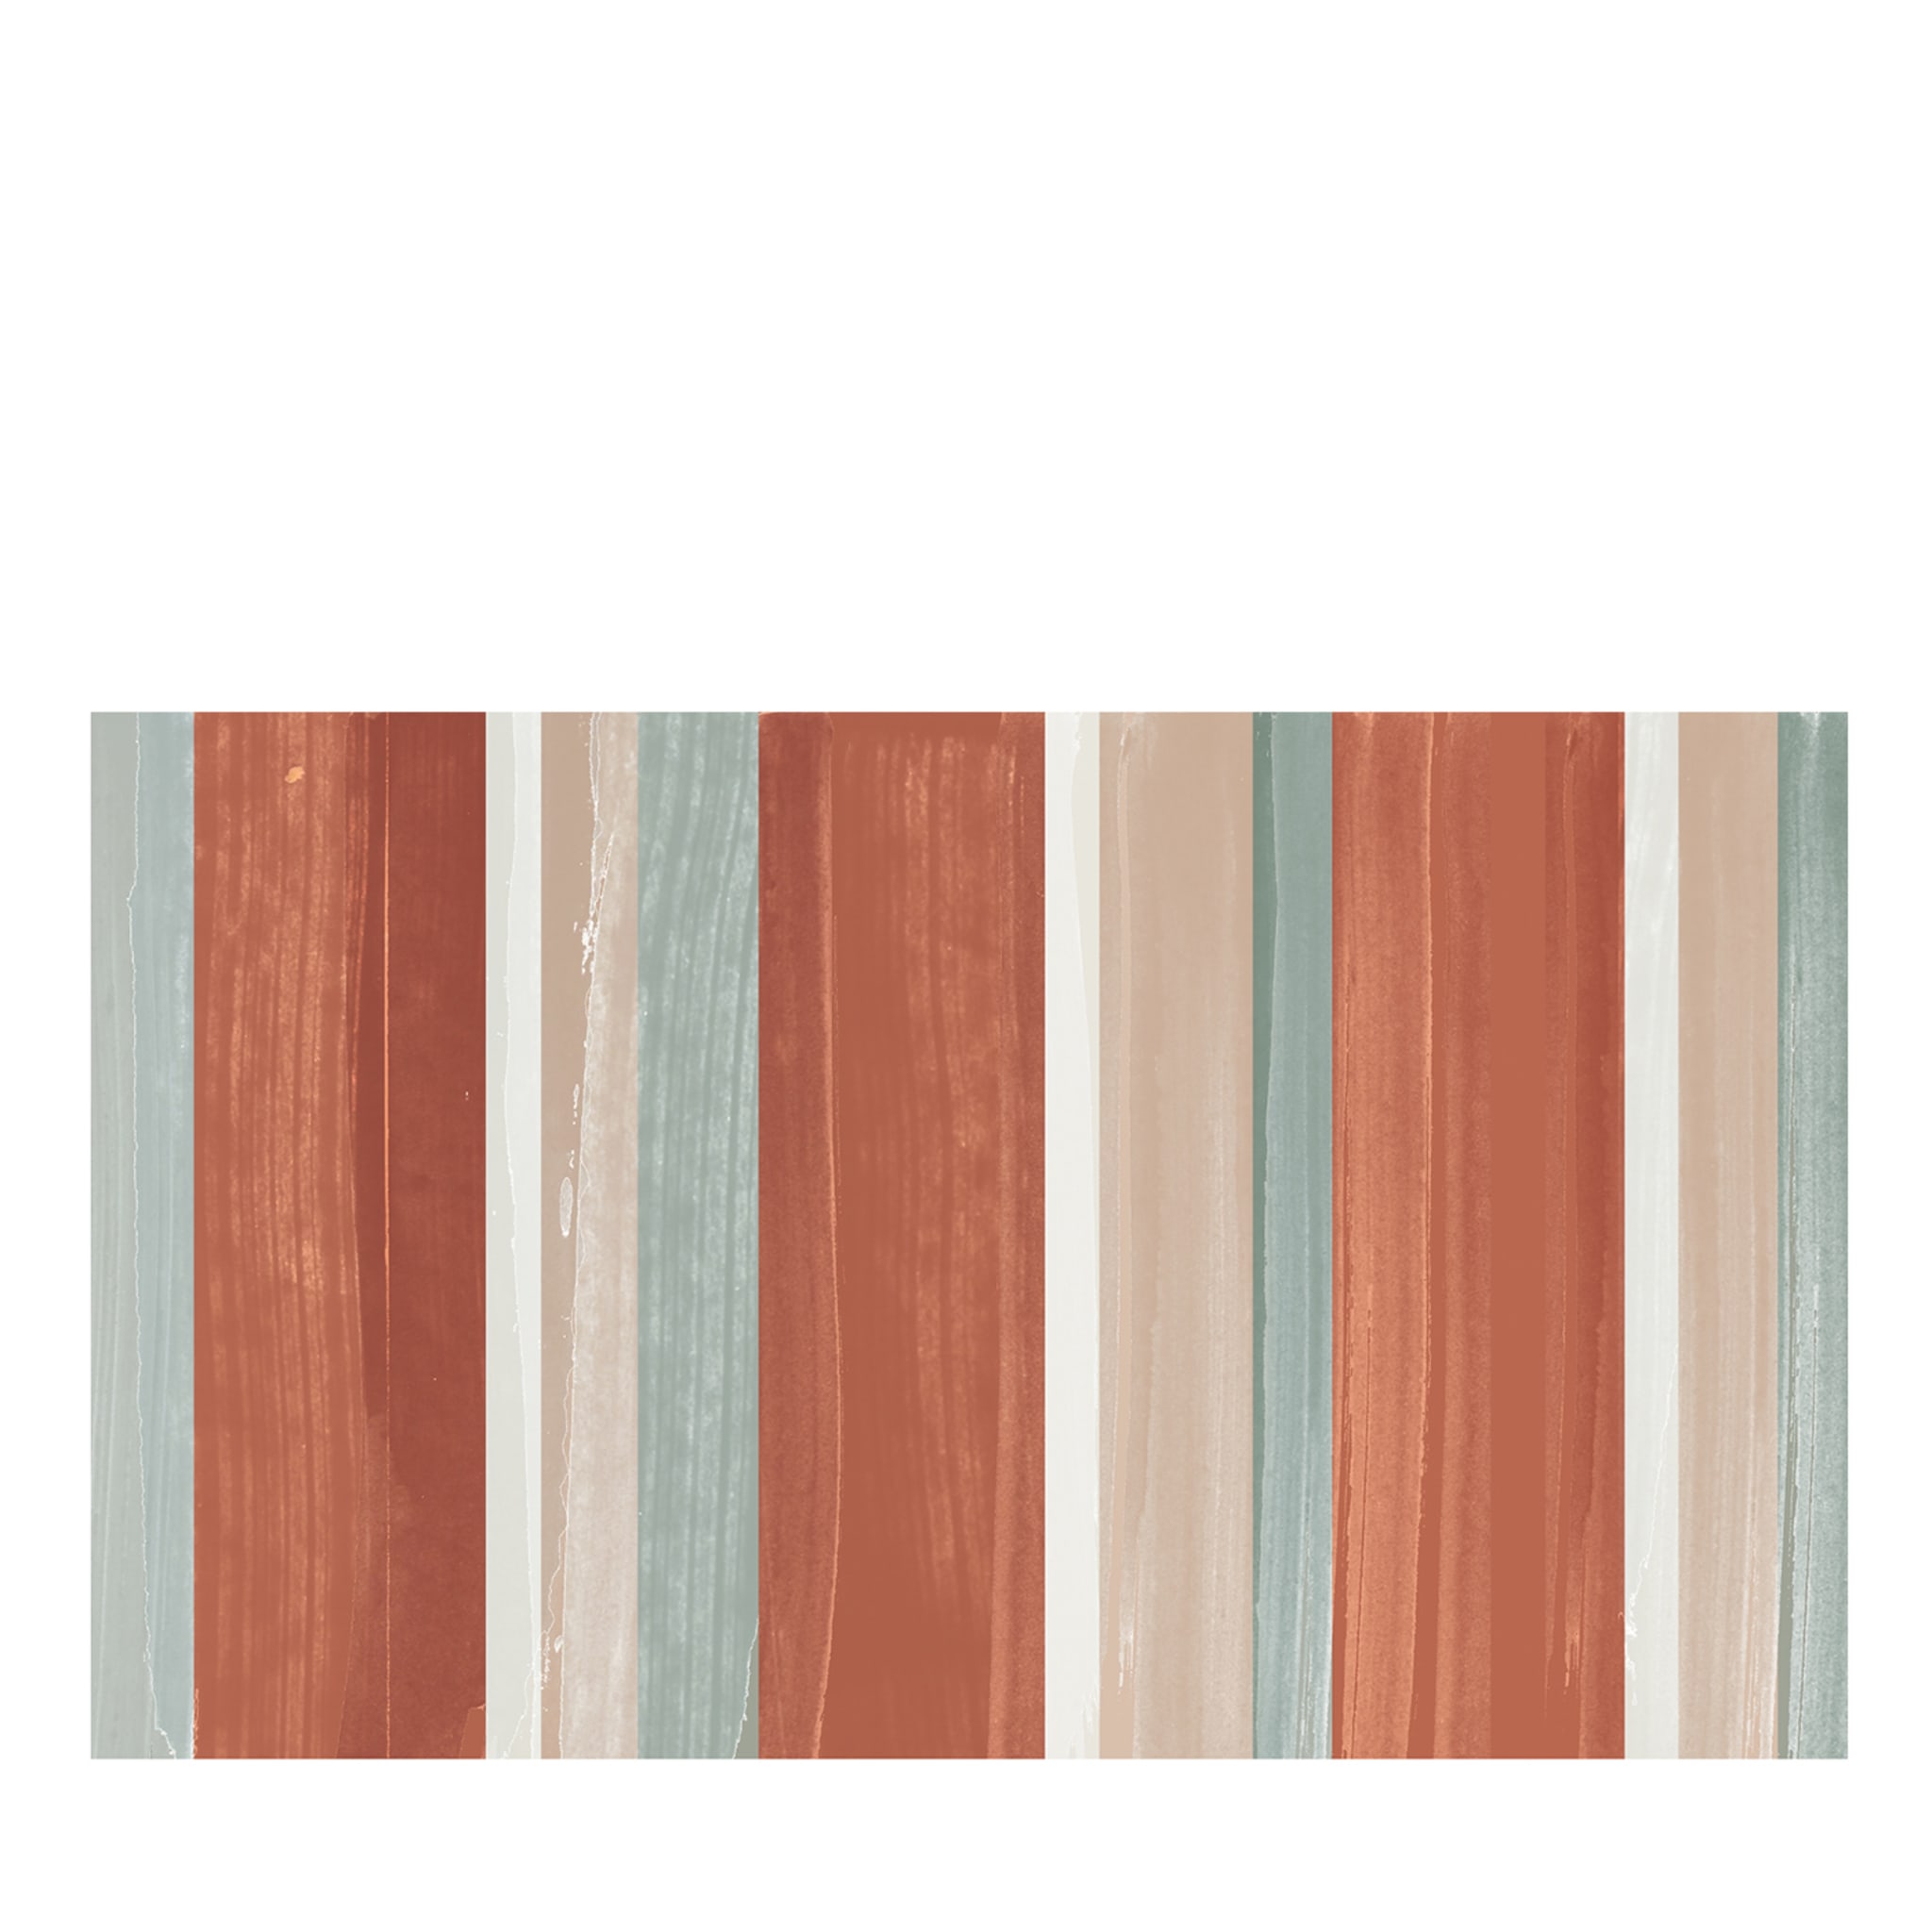 Brushed Stripes by Giulia Strizzi wallpaper#5 - Main view